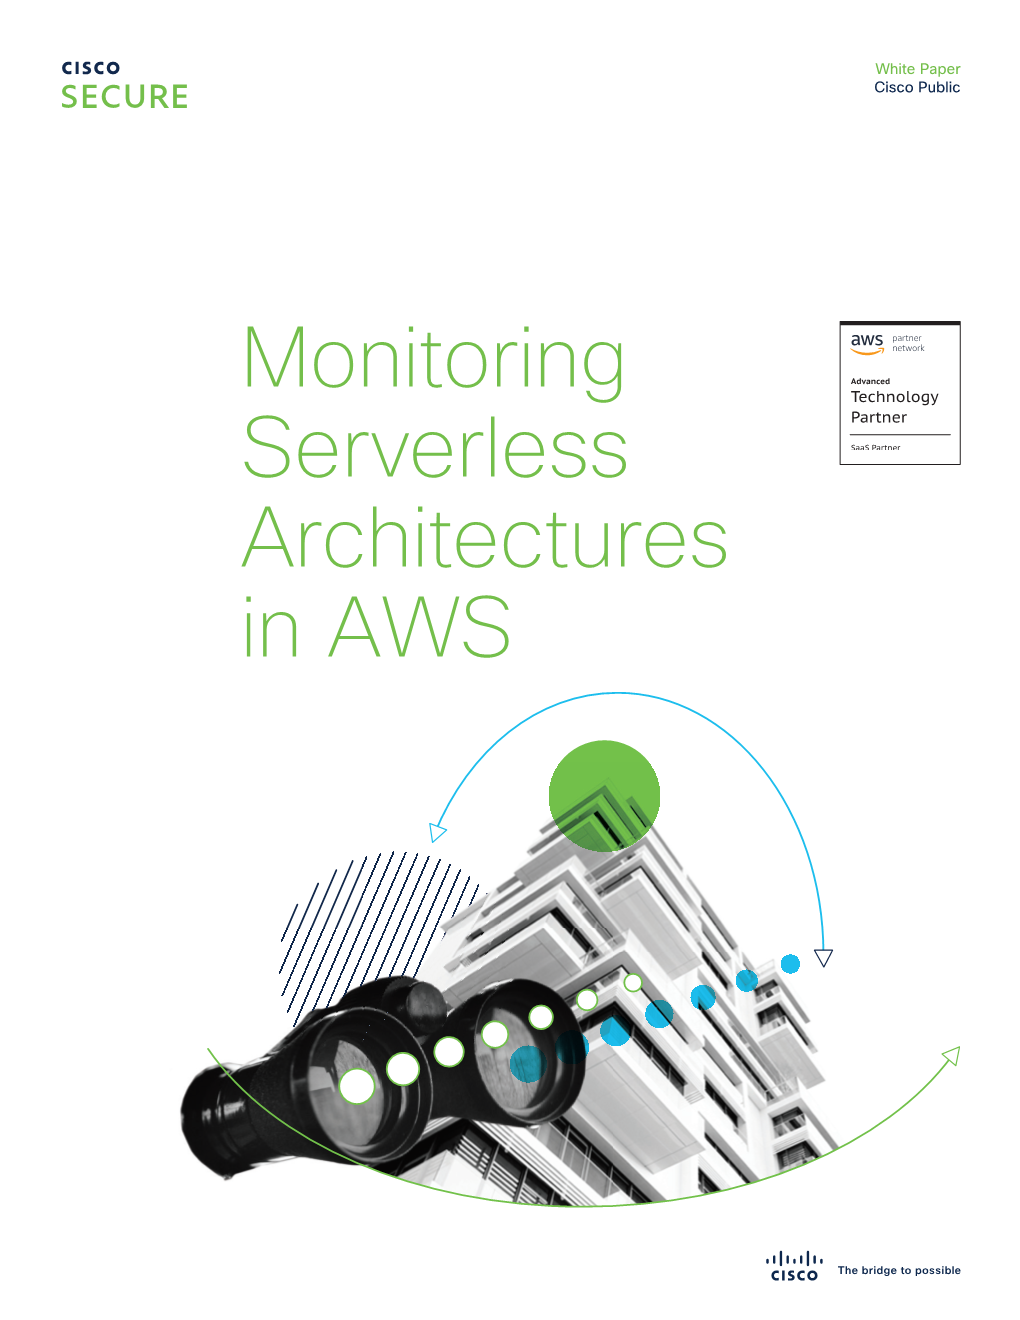 Monitoring Serverless Architectures in AWS White Paper Cisco Public